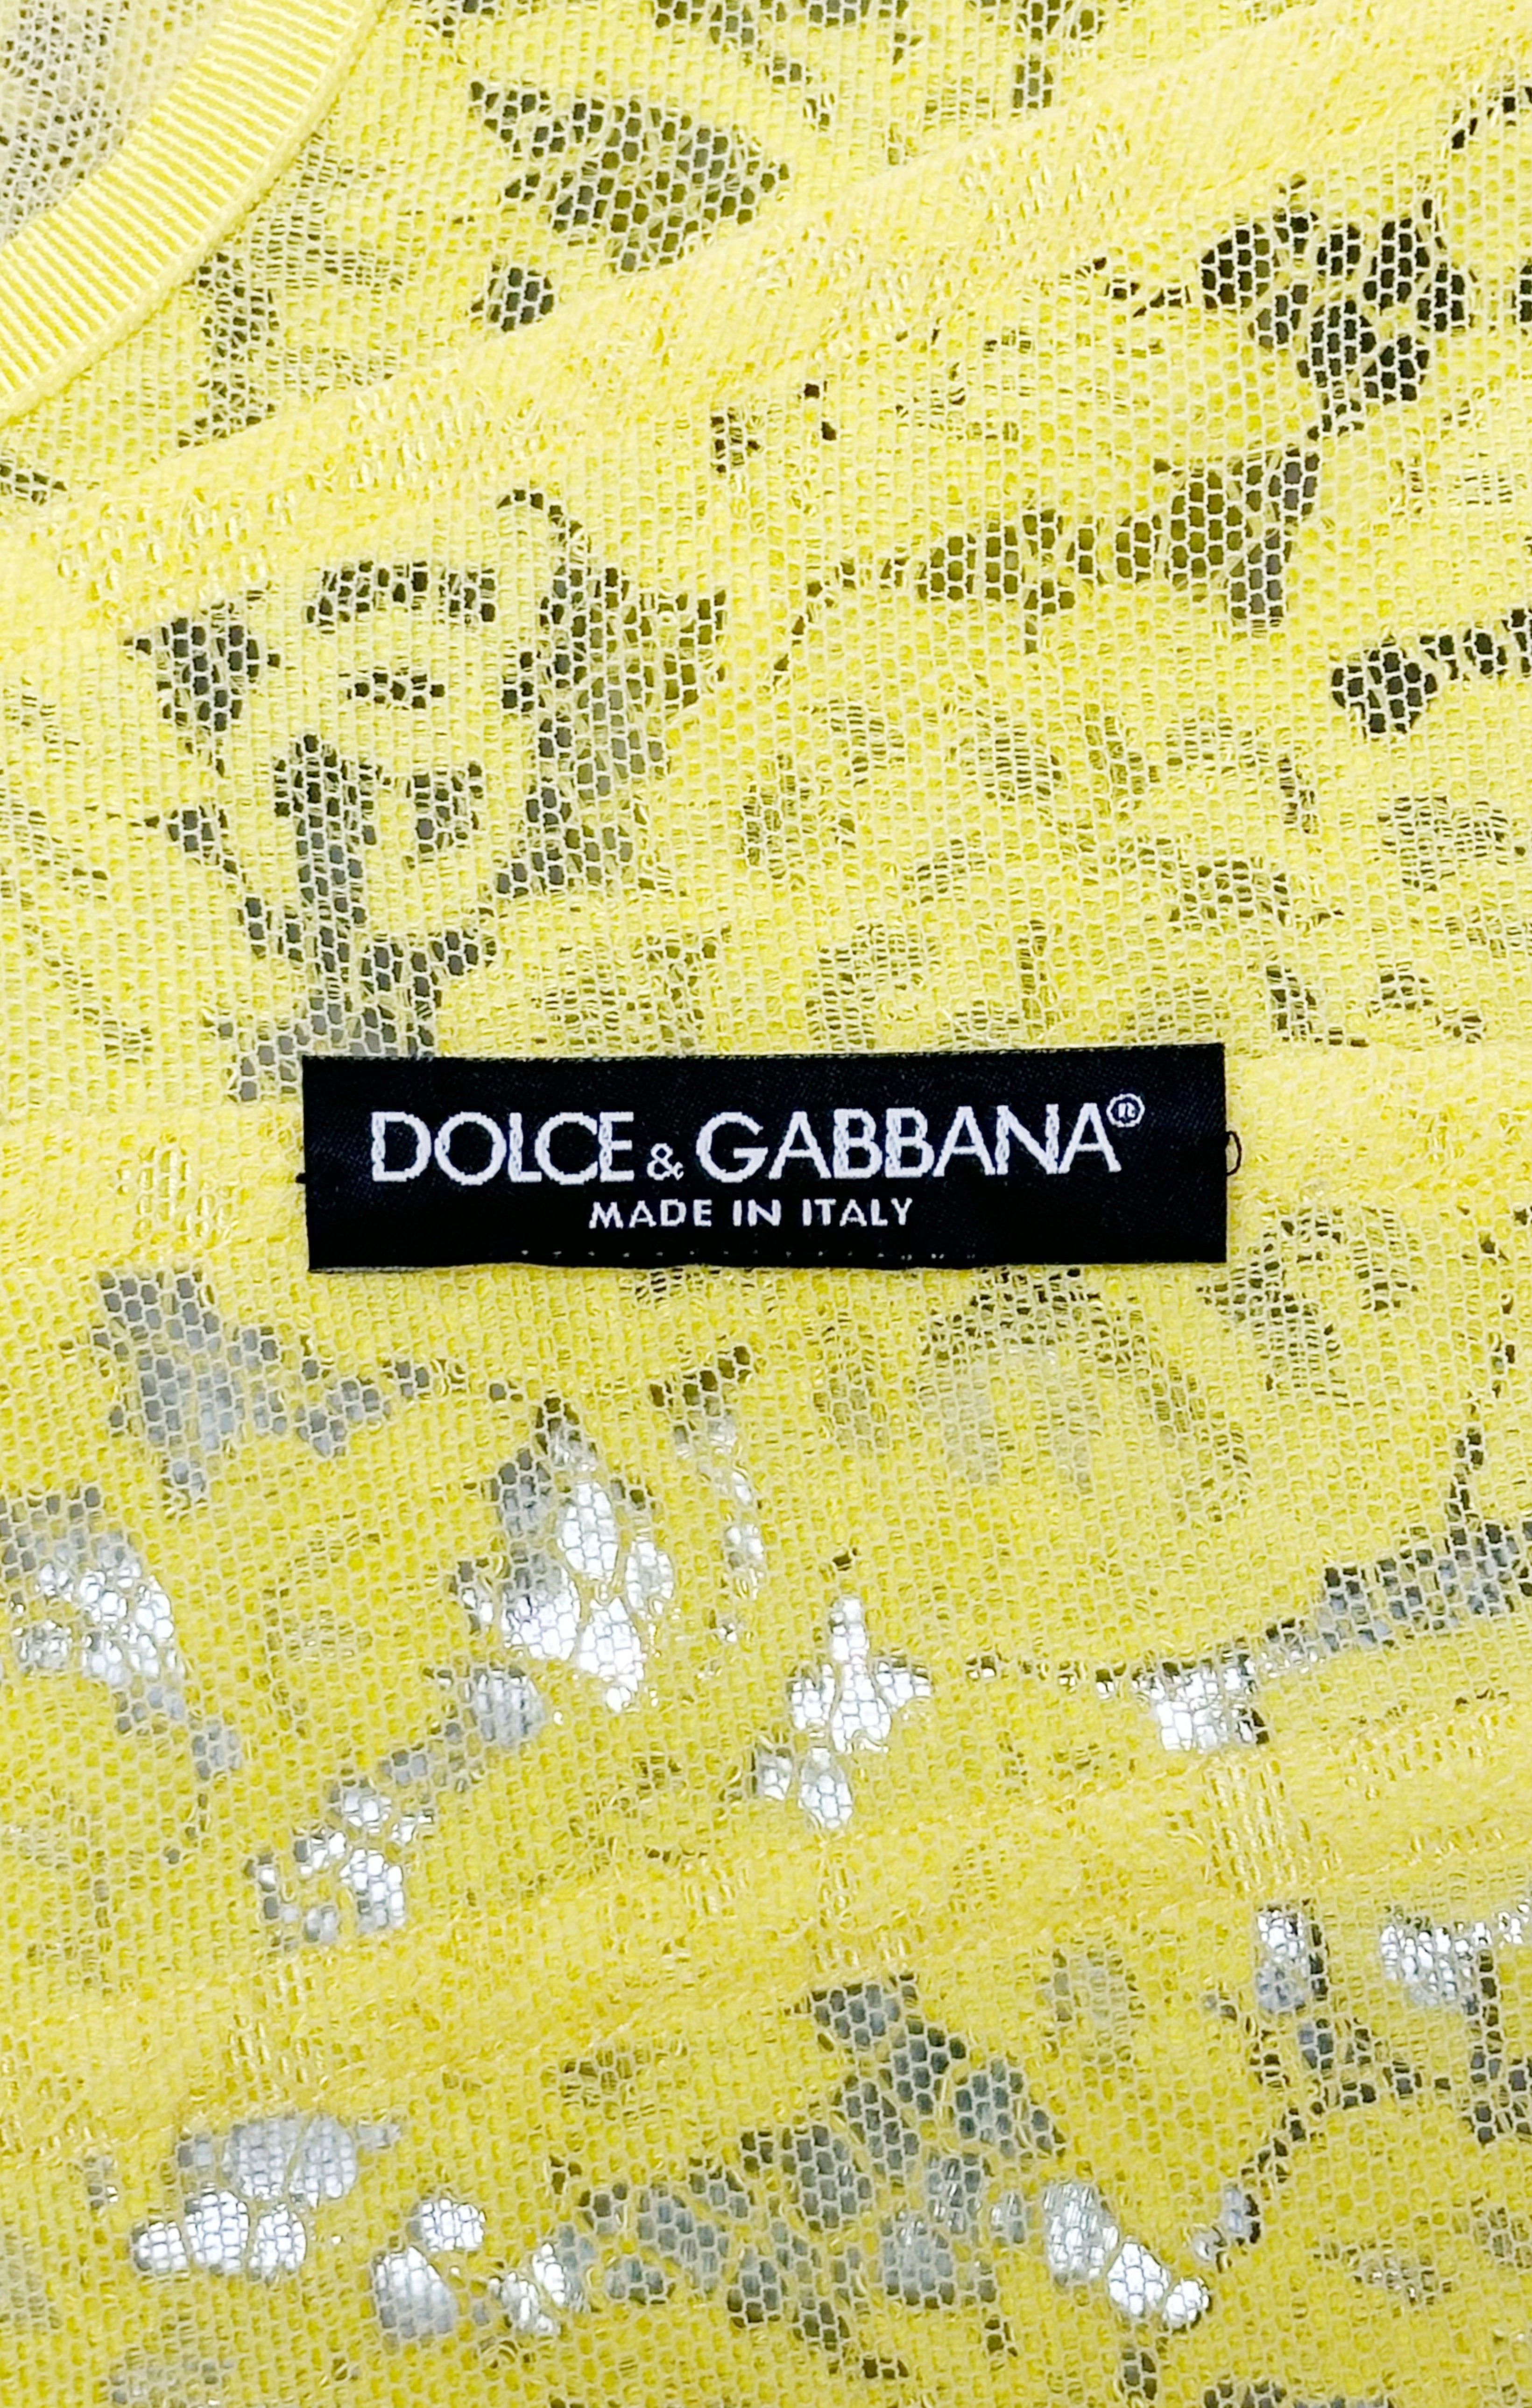 DOLCE & GABBANA Top Size: No size tags, fits like XS/S